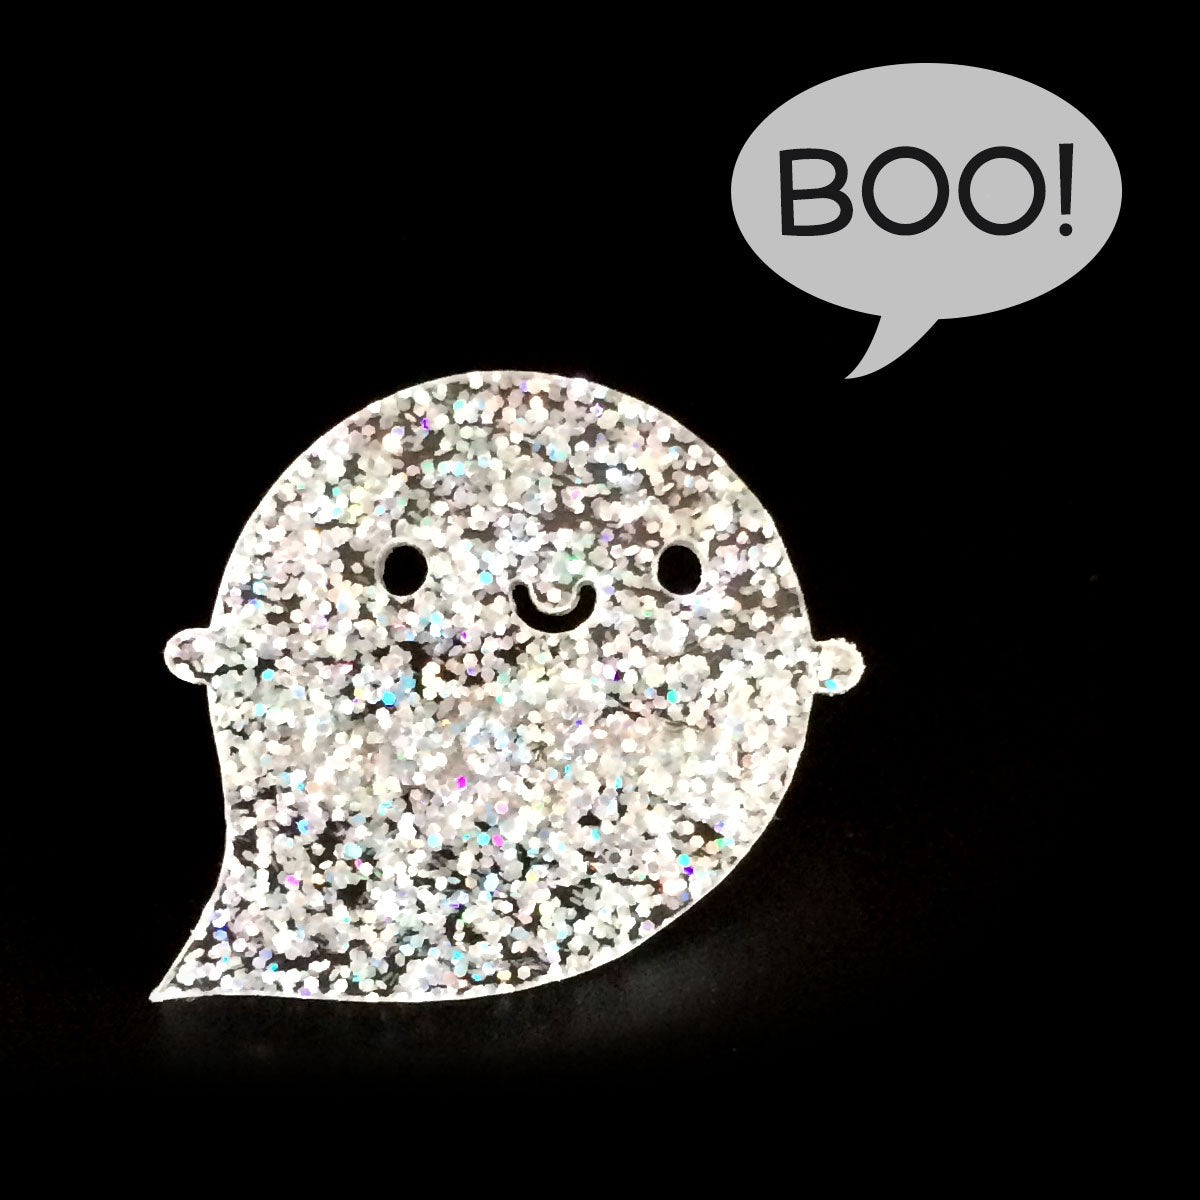 A happy kawaii ghost brooch made from holographic glitter acrylic with a BOO! speech bubble